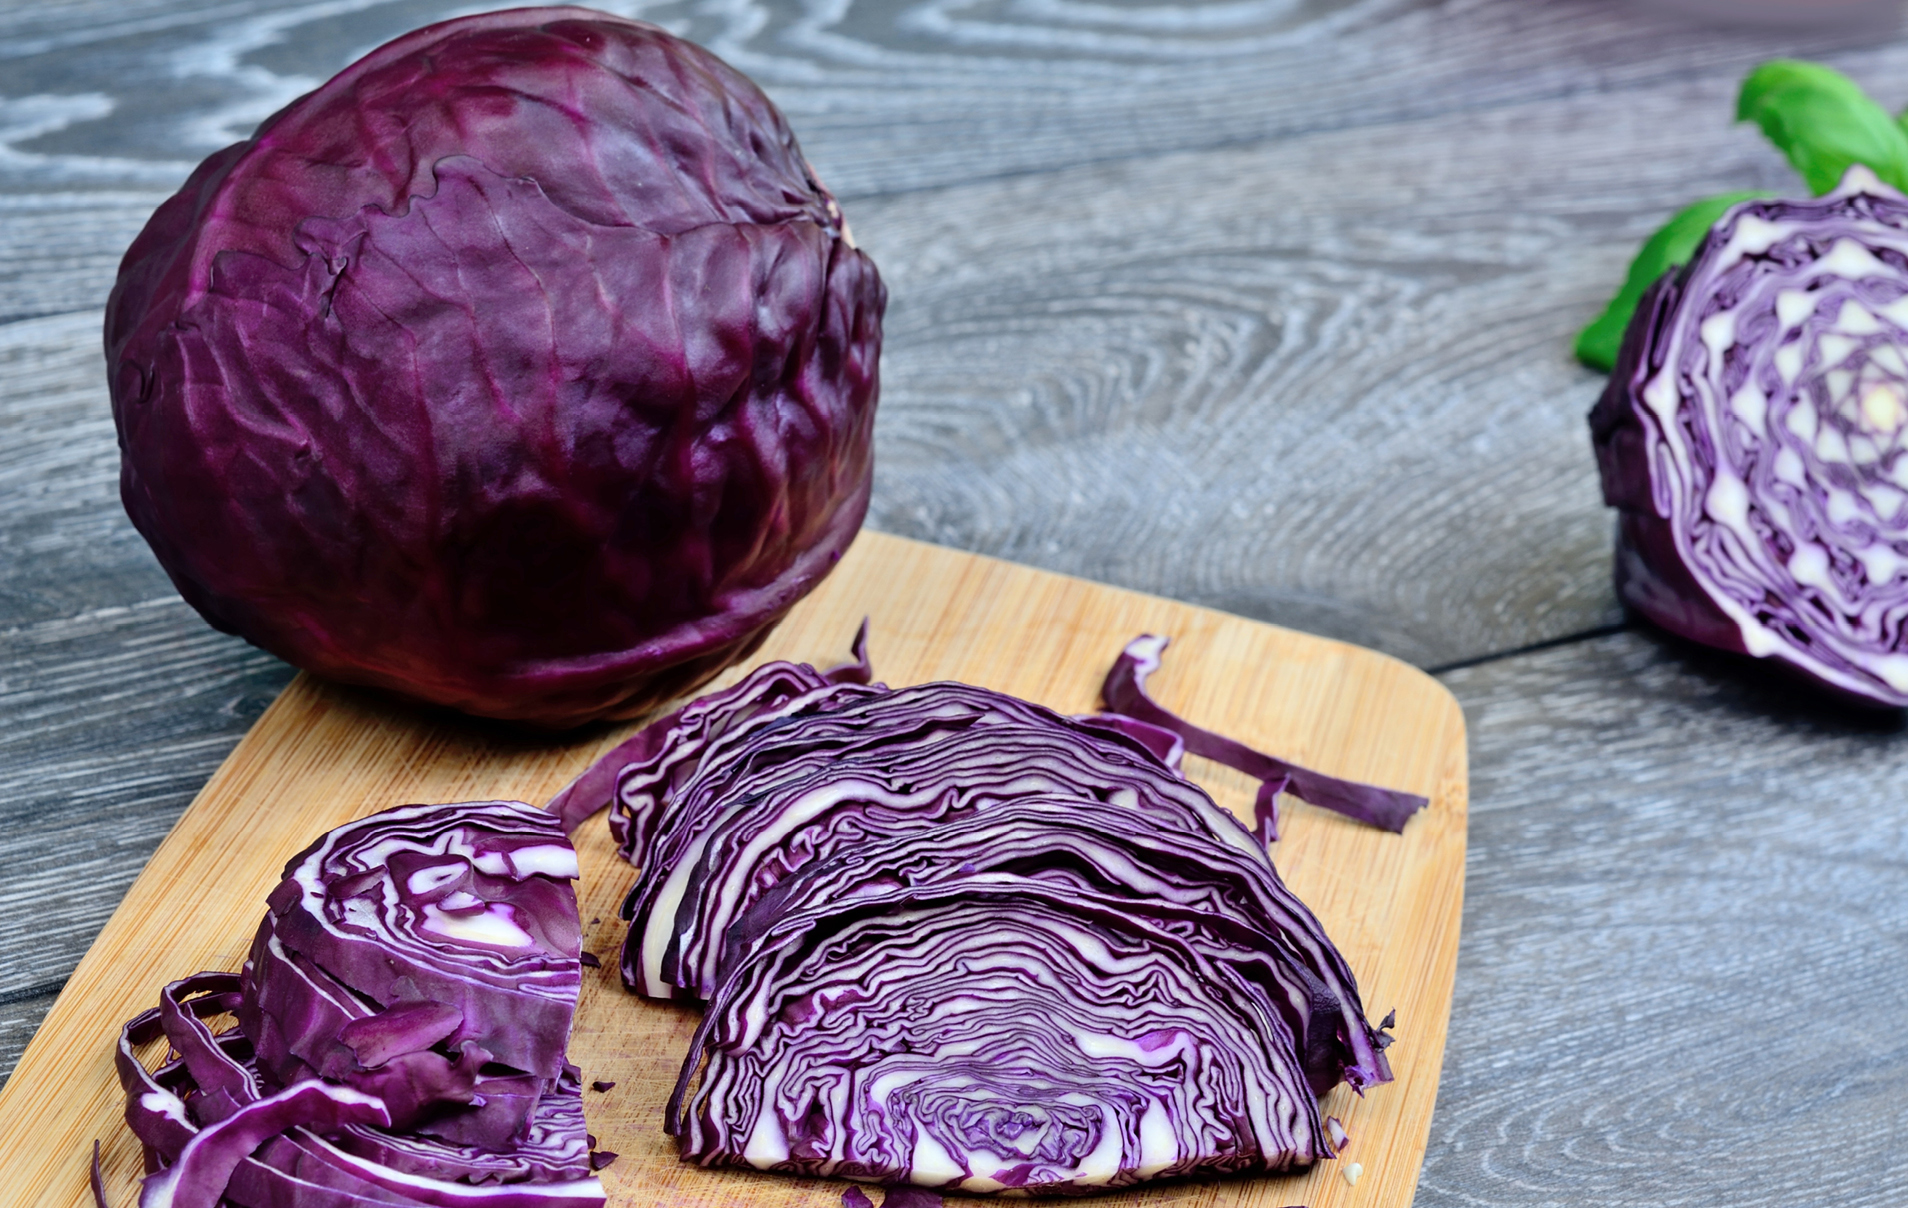 Red Cabbage Slaw